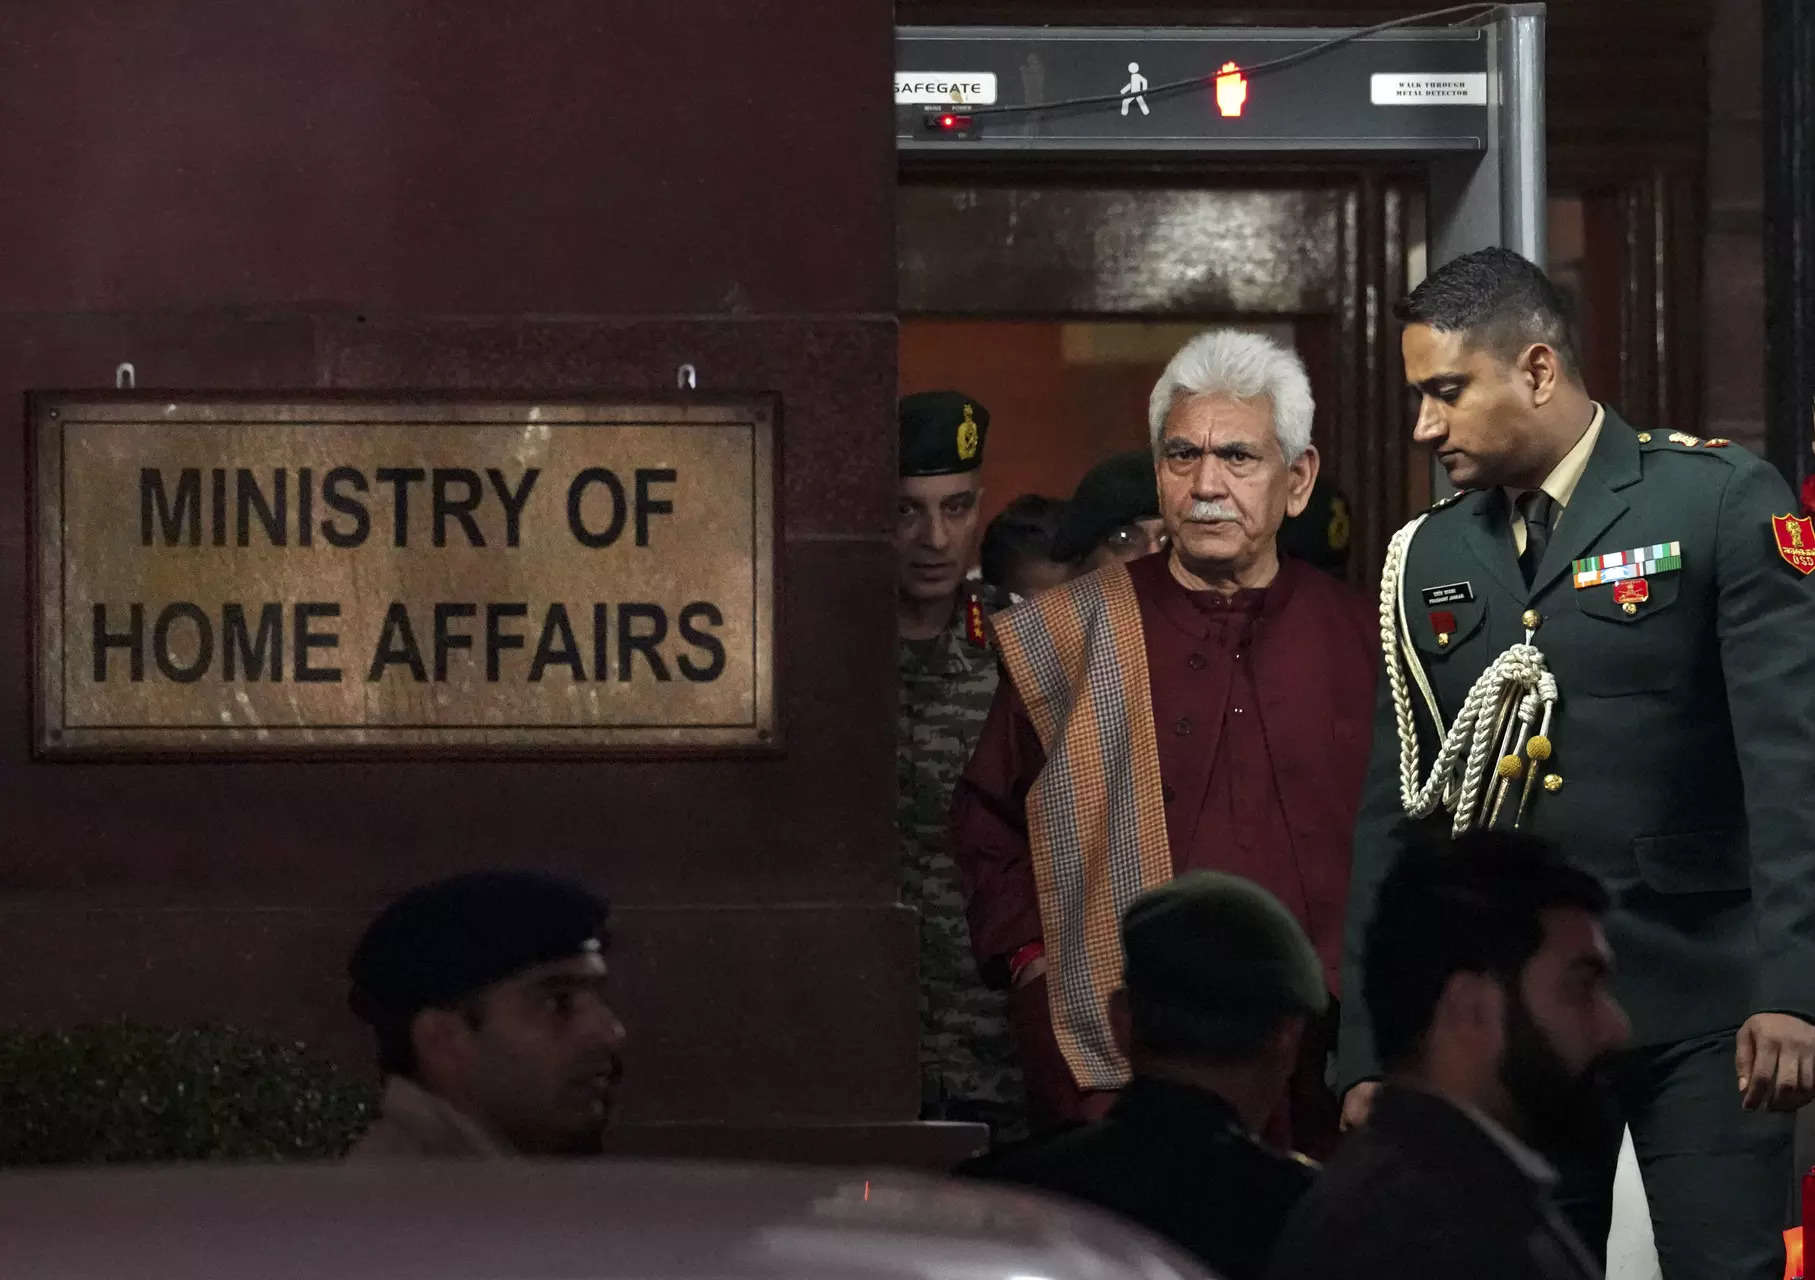 JK terror attacks: Security forces given free hand to bring perpetrators to justice, says LG Manoj Sinha 